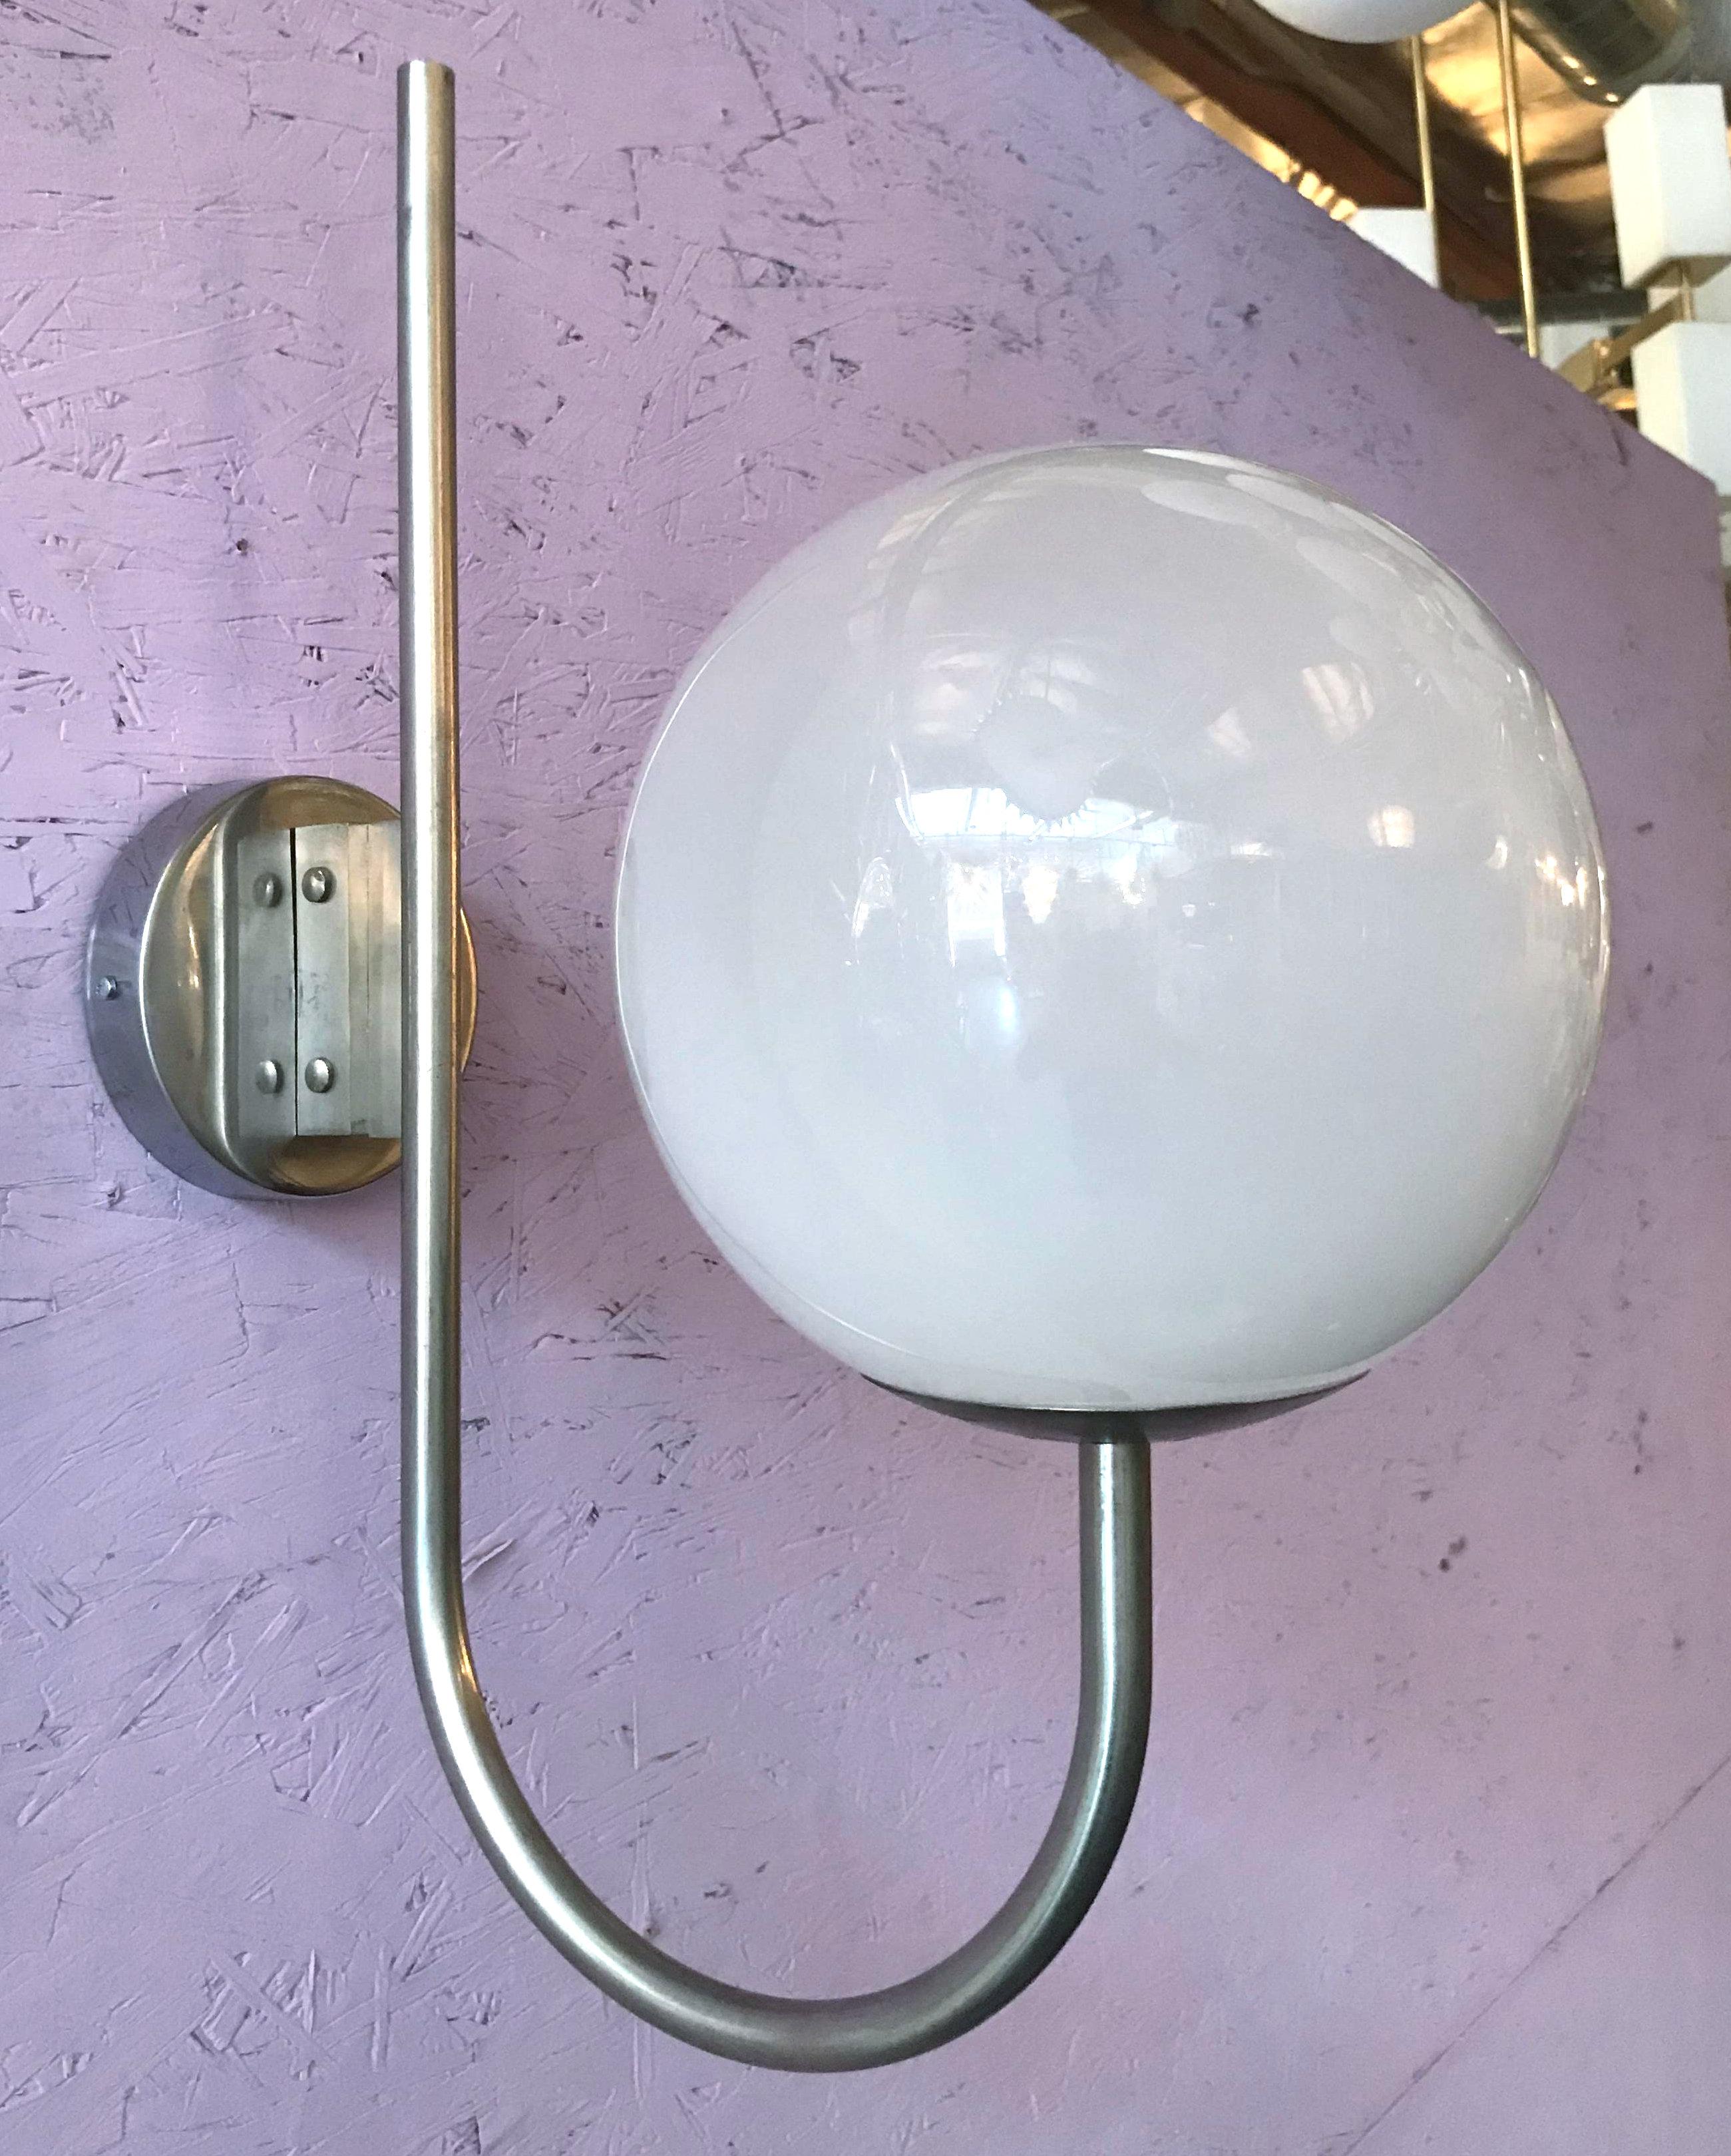 Vintage Italian wall lights with glossy white Murano glass globes mounted on nickel metal frames / Designed by Sergio Mazza, circa 1960s / Made in Italy
1 light / E26 or E27 type / max 60W
Height: 22.5 inches / Width: 8.5 inches / Depth: 17 inches
1